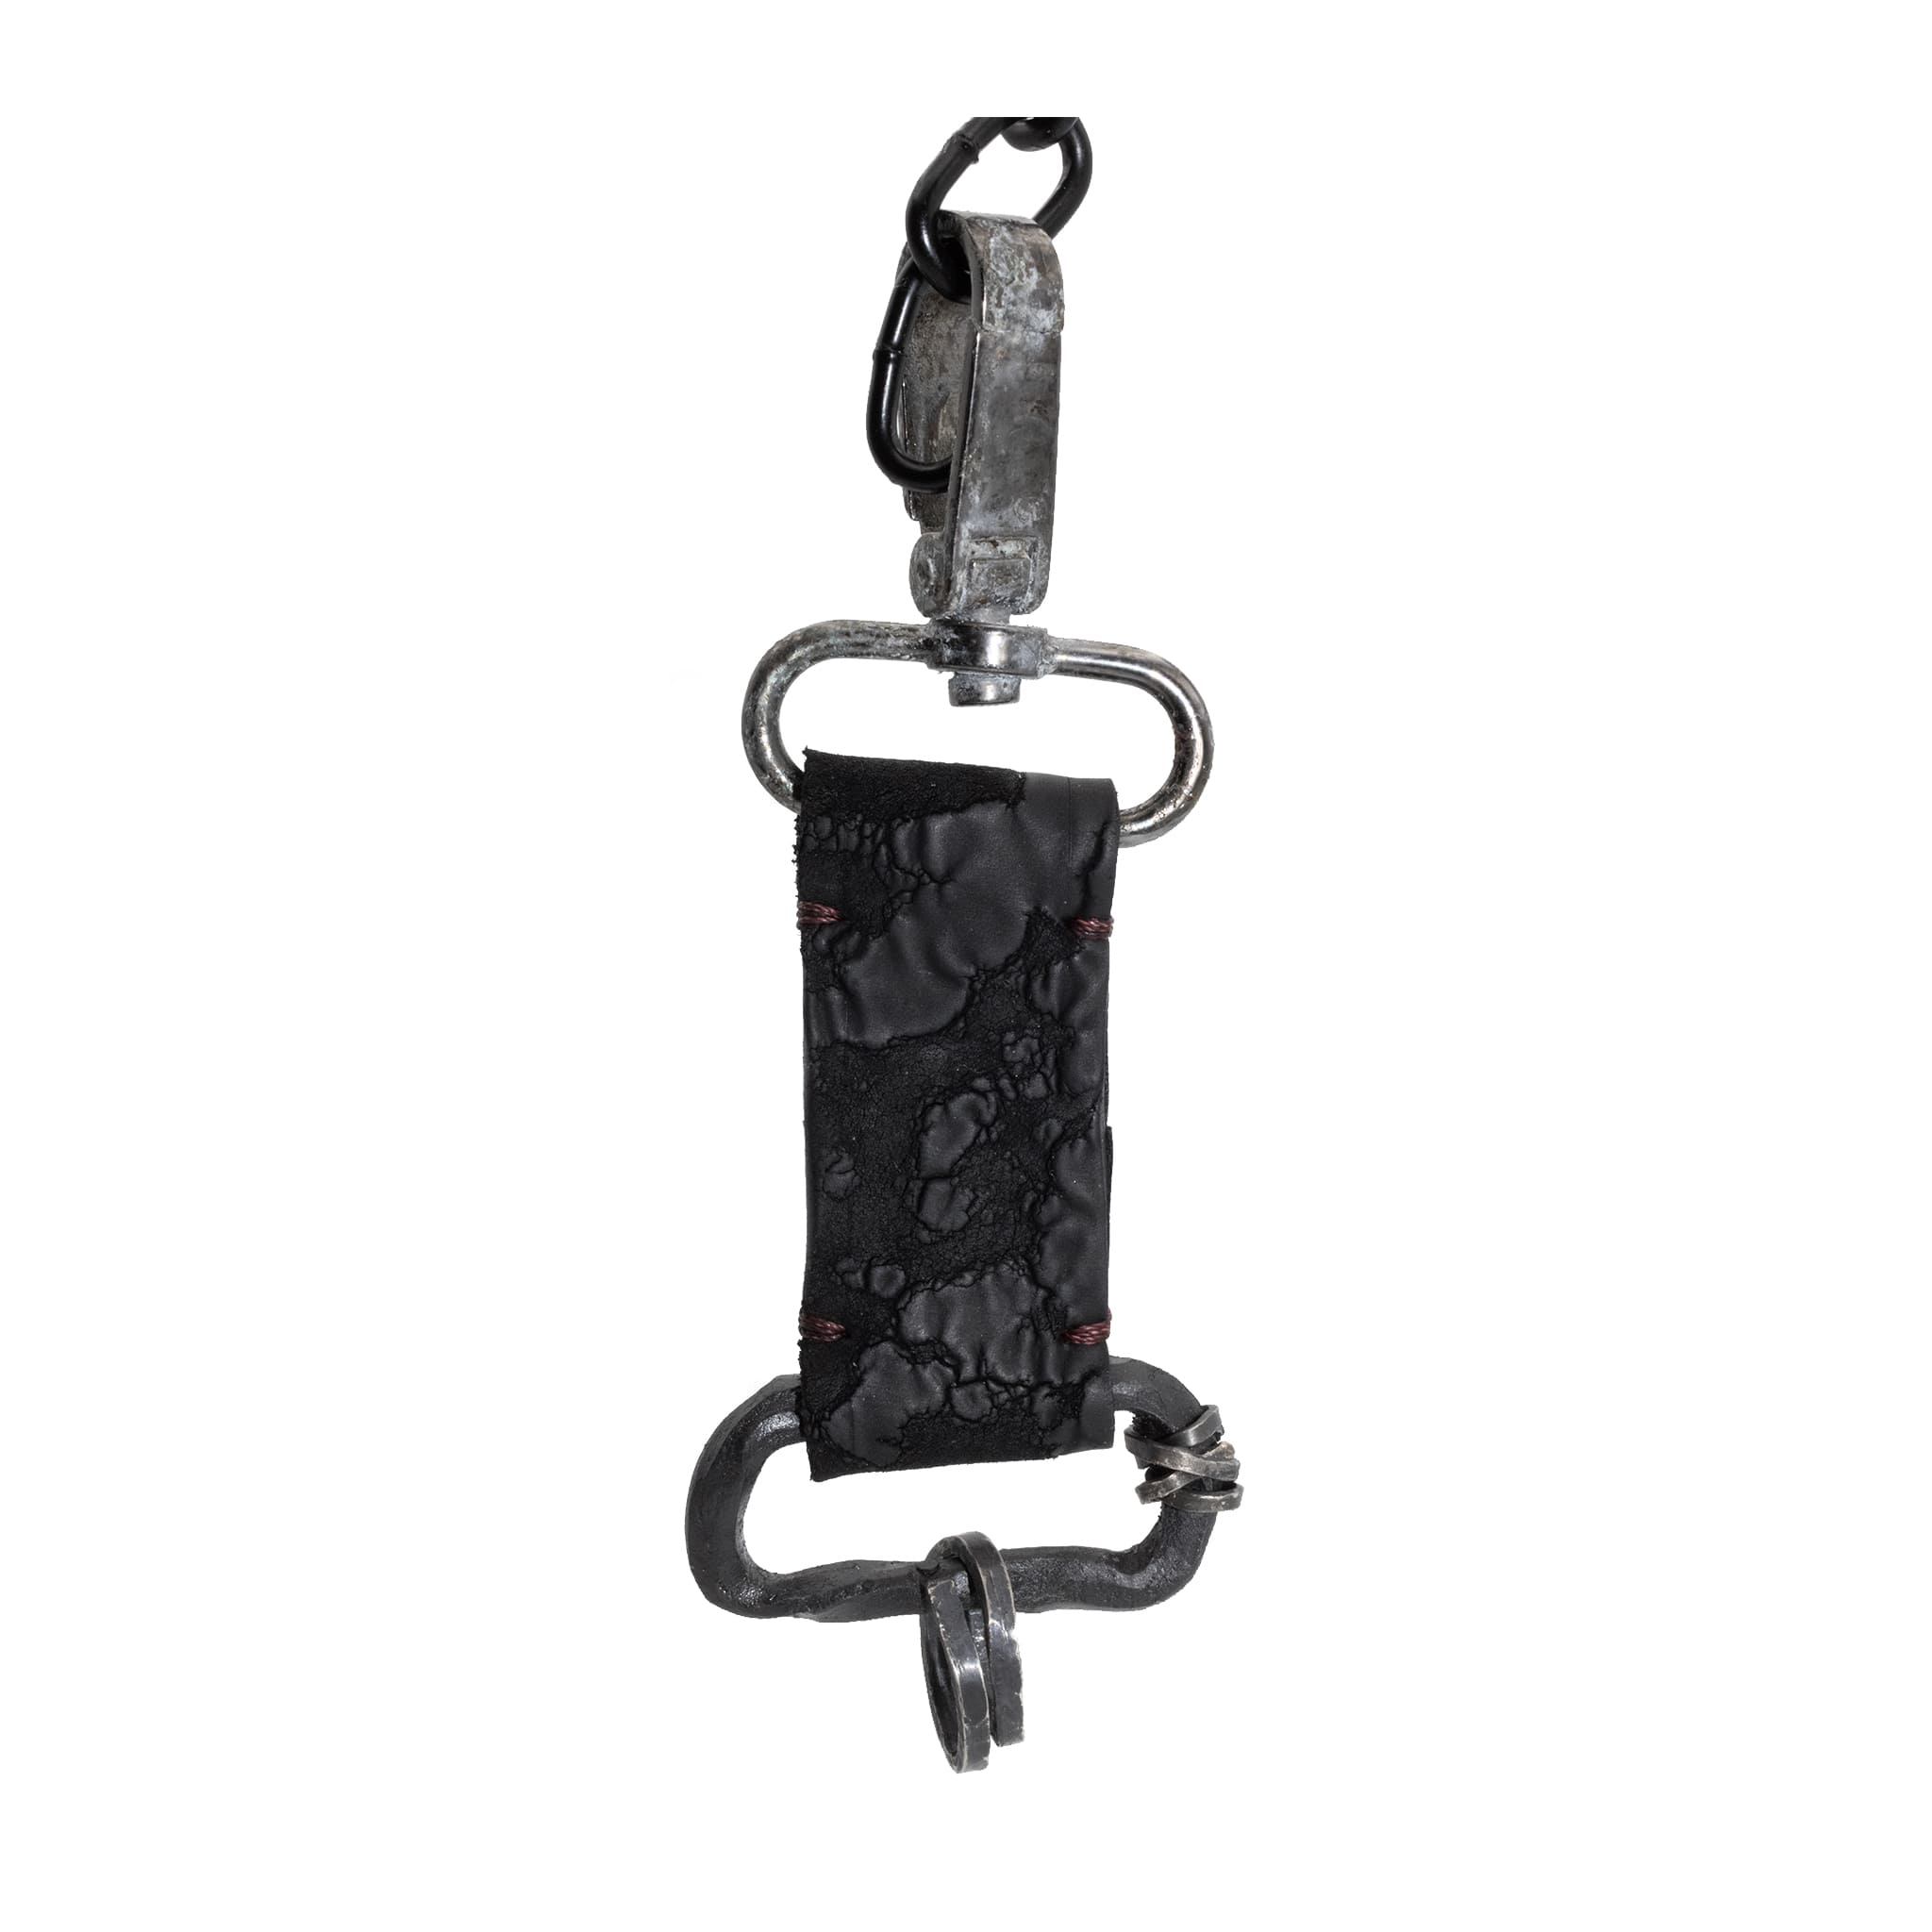 hand stitched with blood dyed thread the black reverse horse culatta leather keychain features a military clip and hand forged iron hardware with .925 sterling silver details.